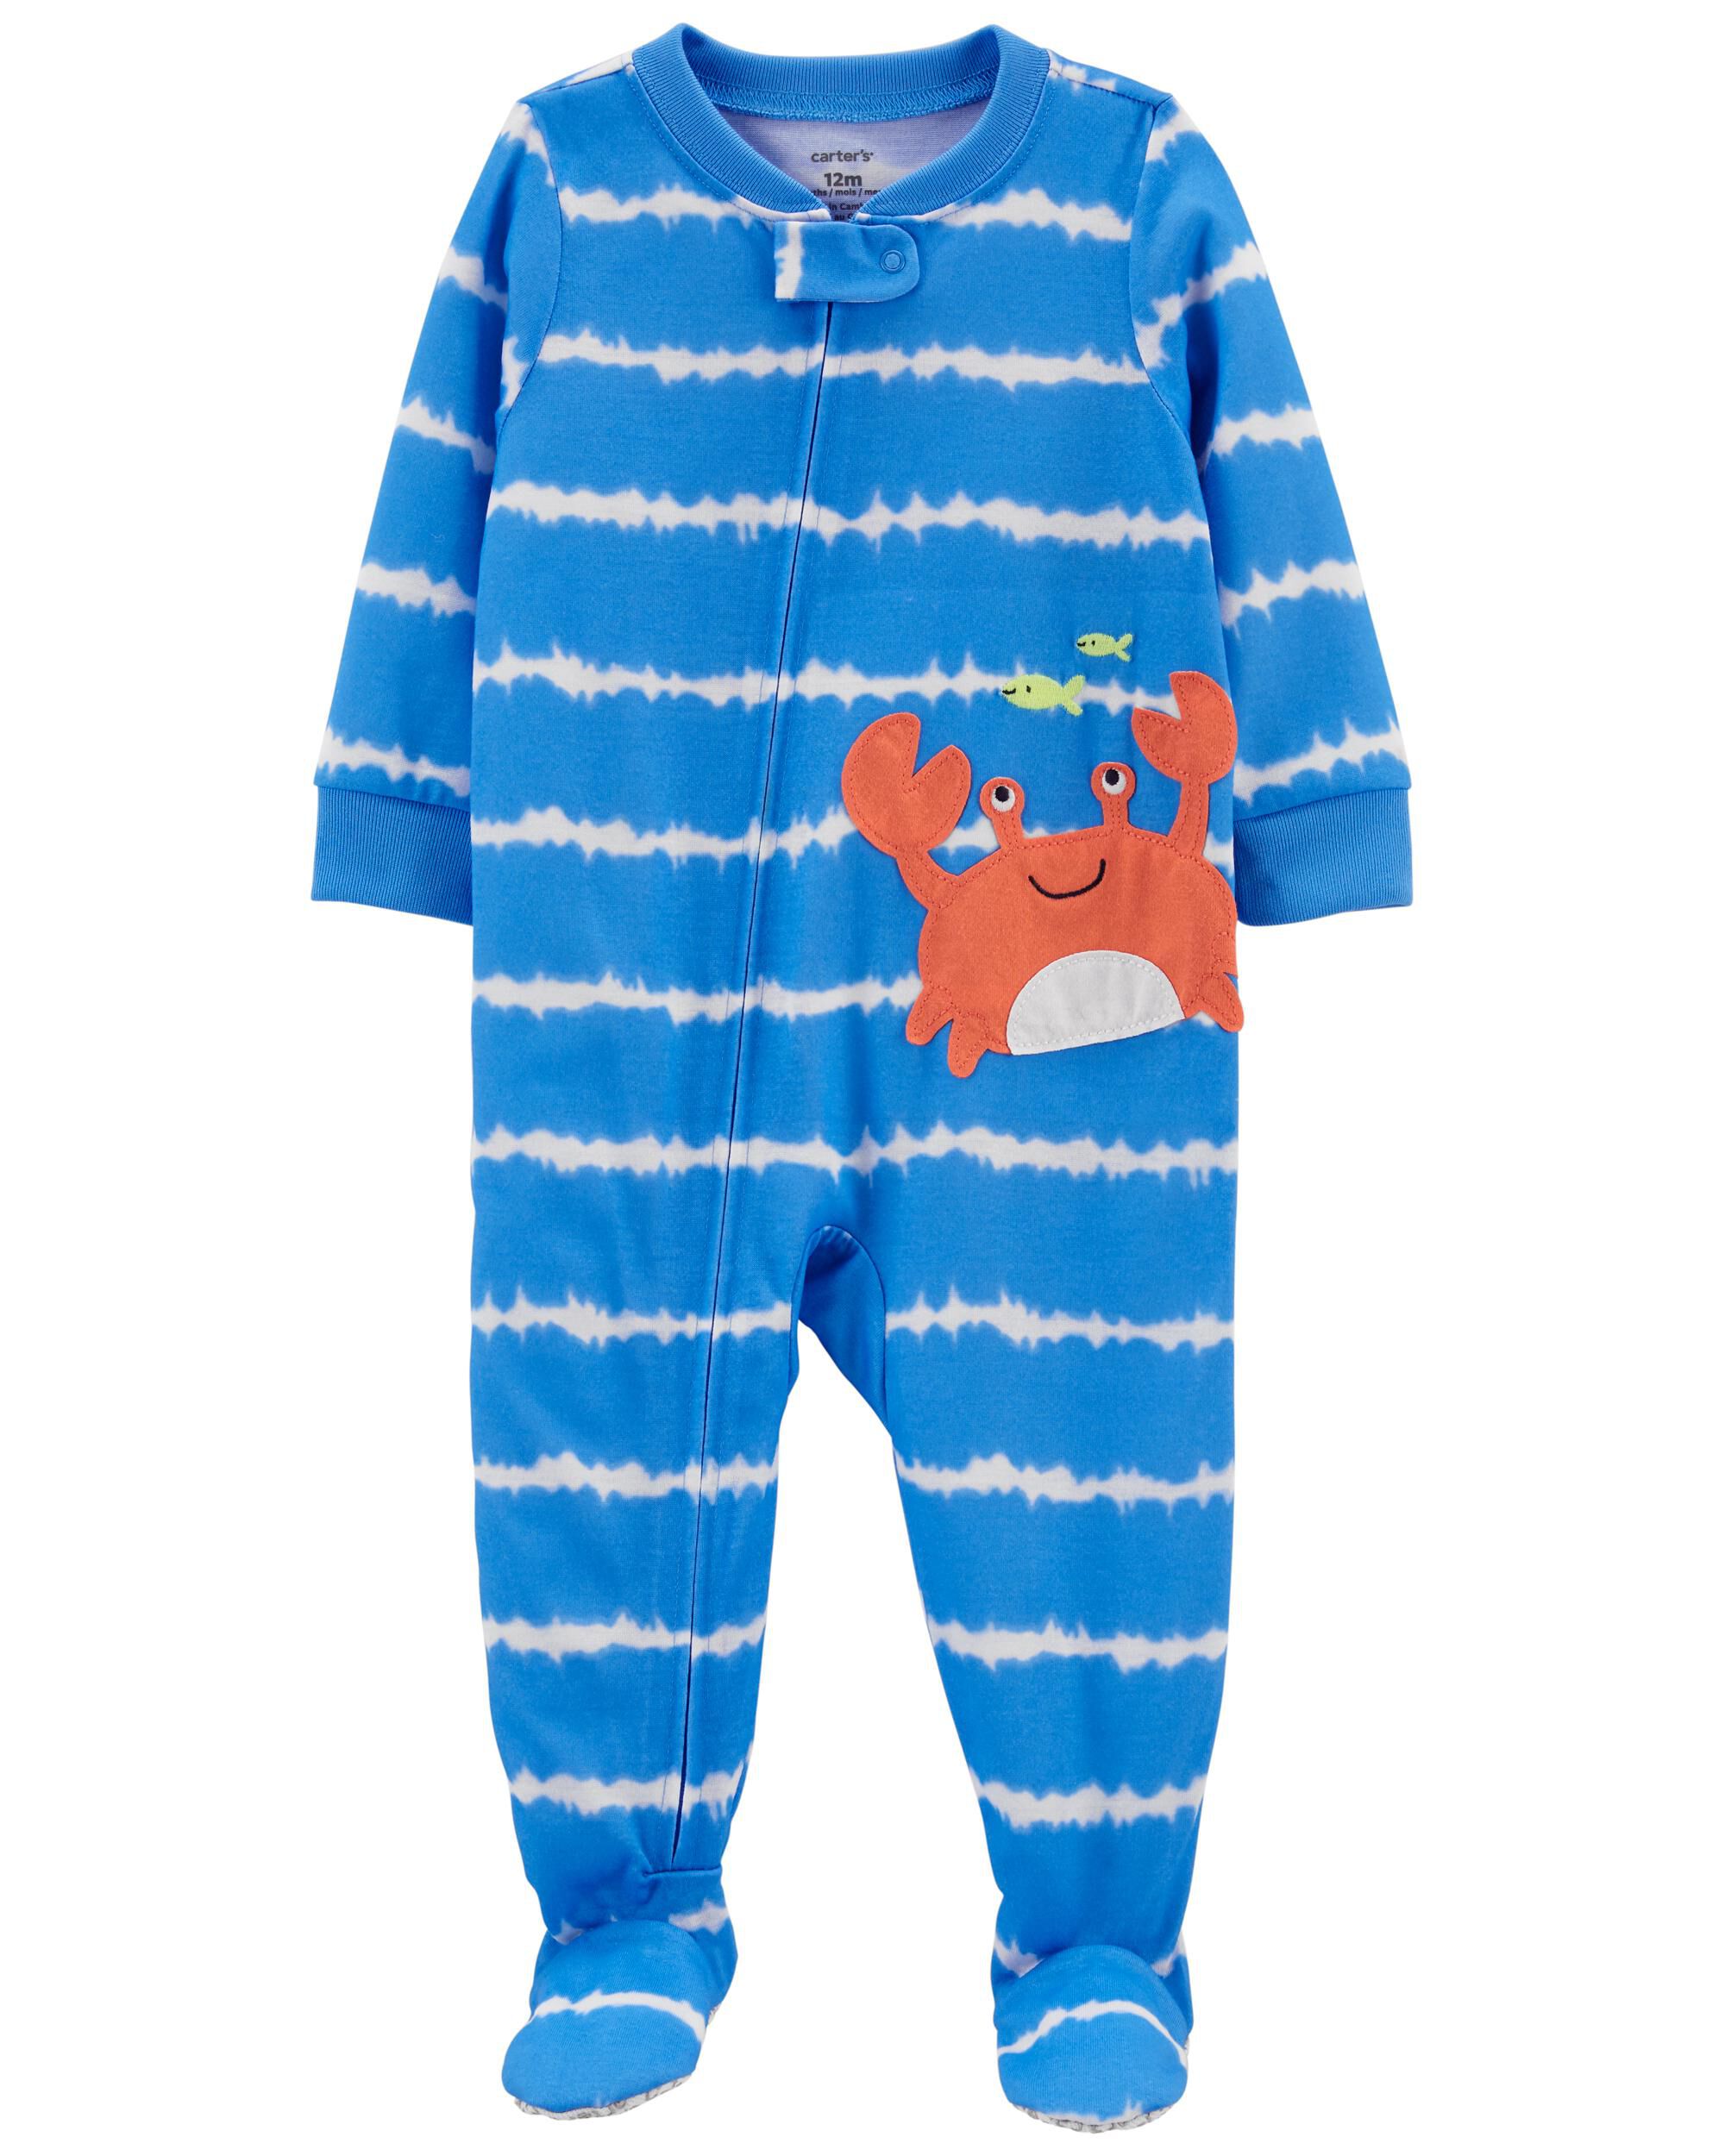 Carter's Boys Glow-In-The-Dark Space Ship and Stars Cotton Footed Pajama Sleeper